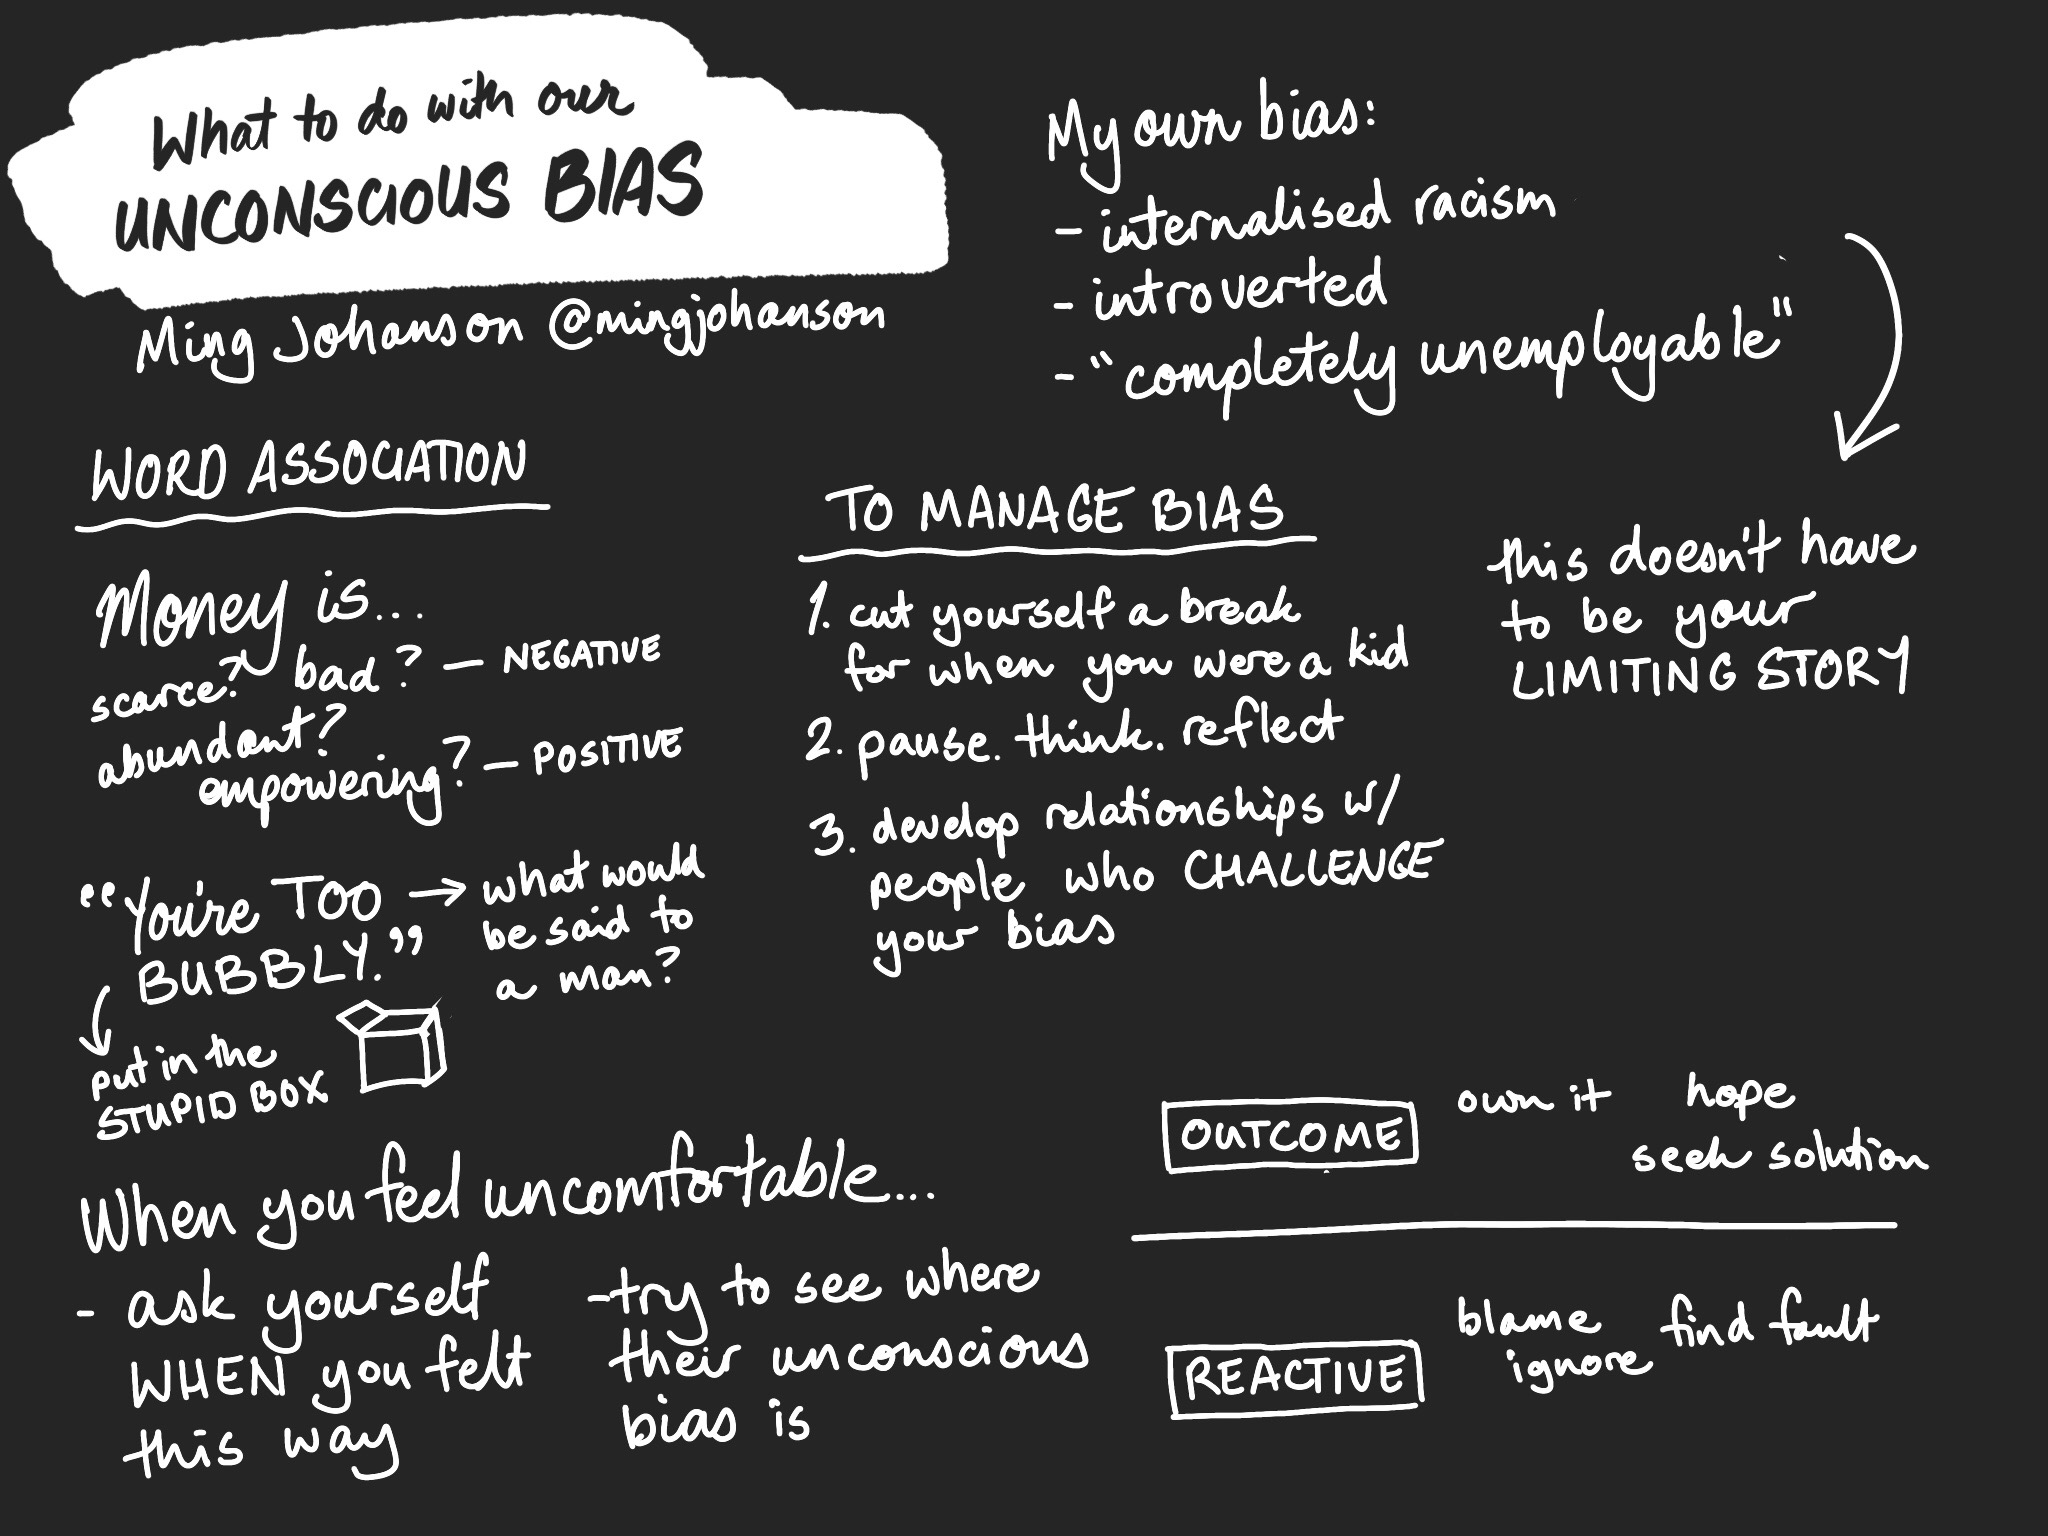 assets/sketching/img_1161.jpg|Sketchnote of the talk What to do with our unconscious bias by Ming Johanson